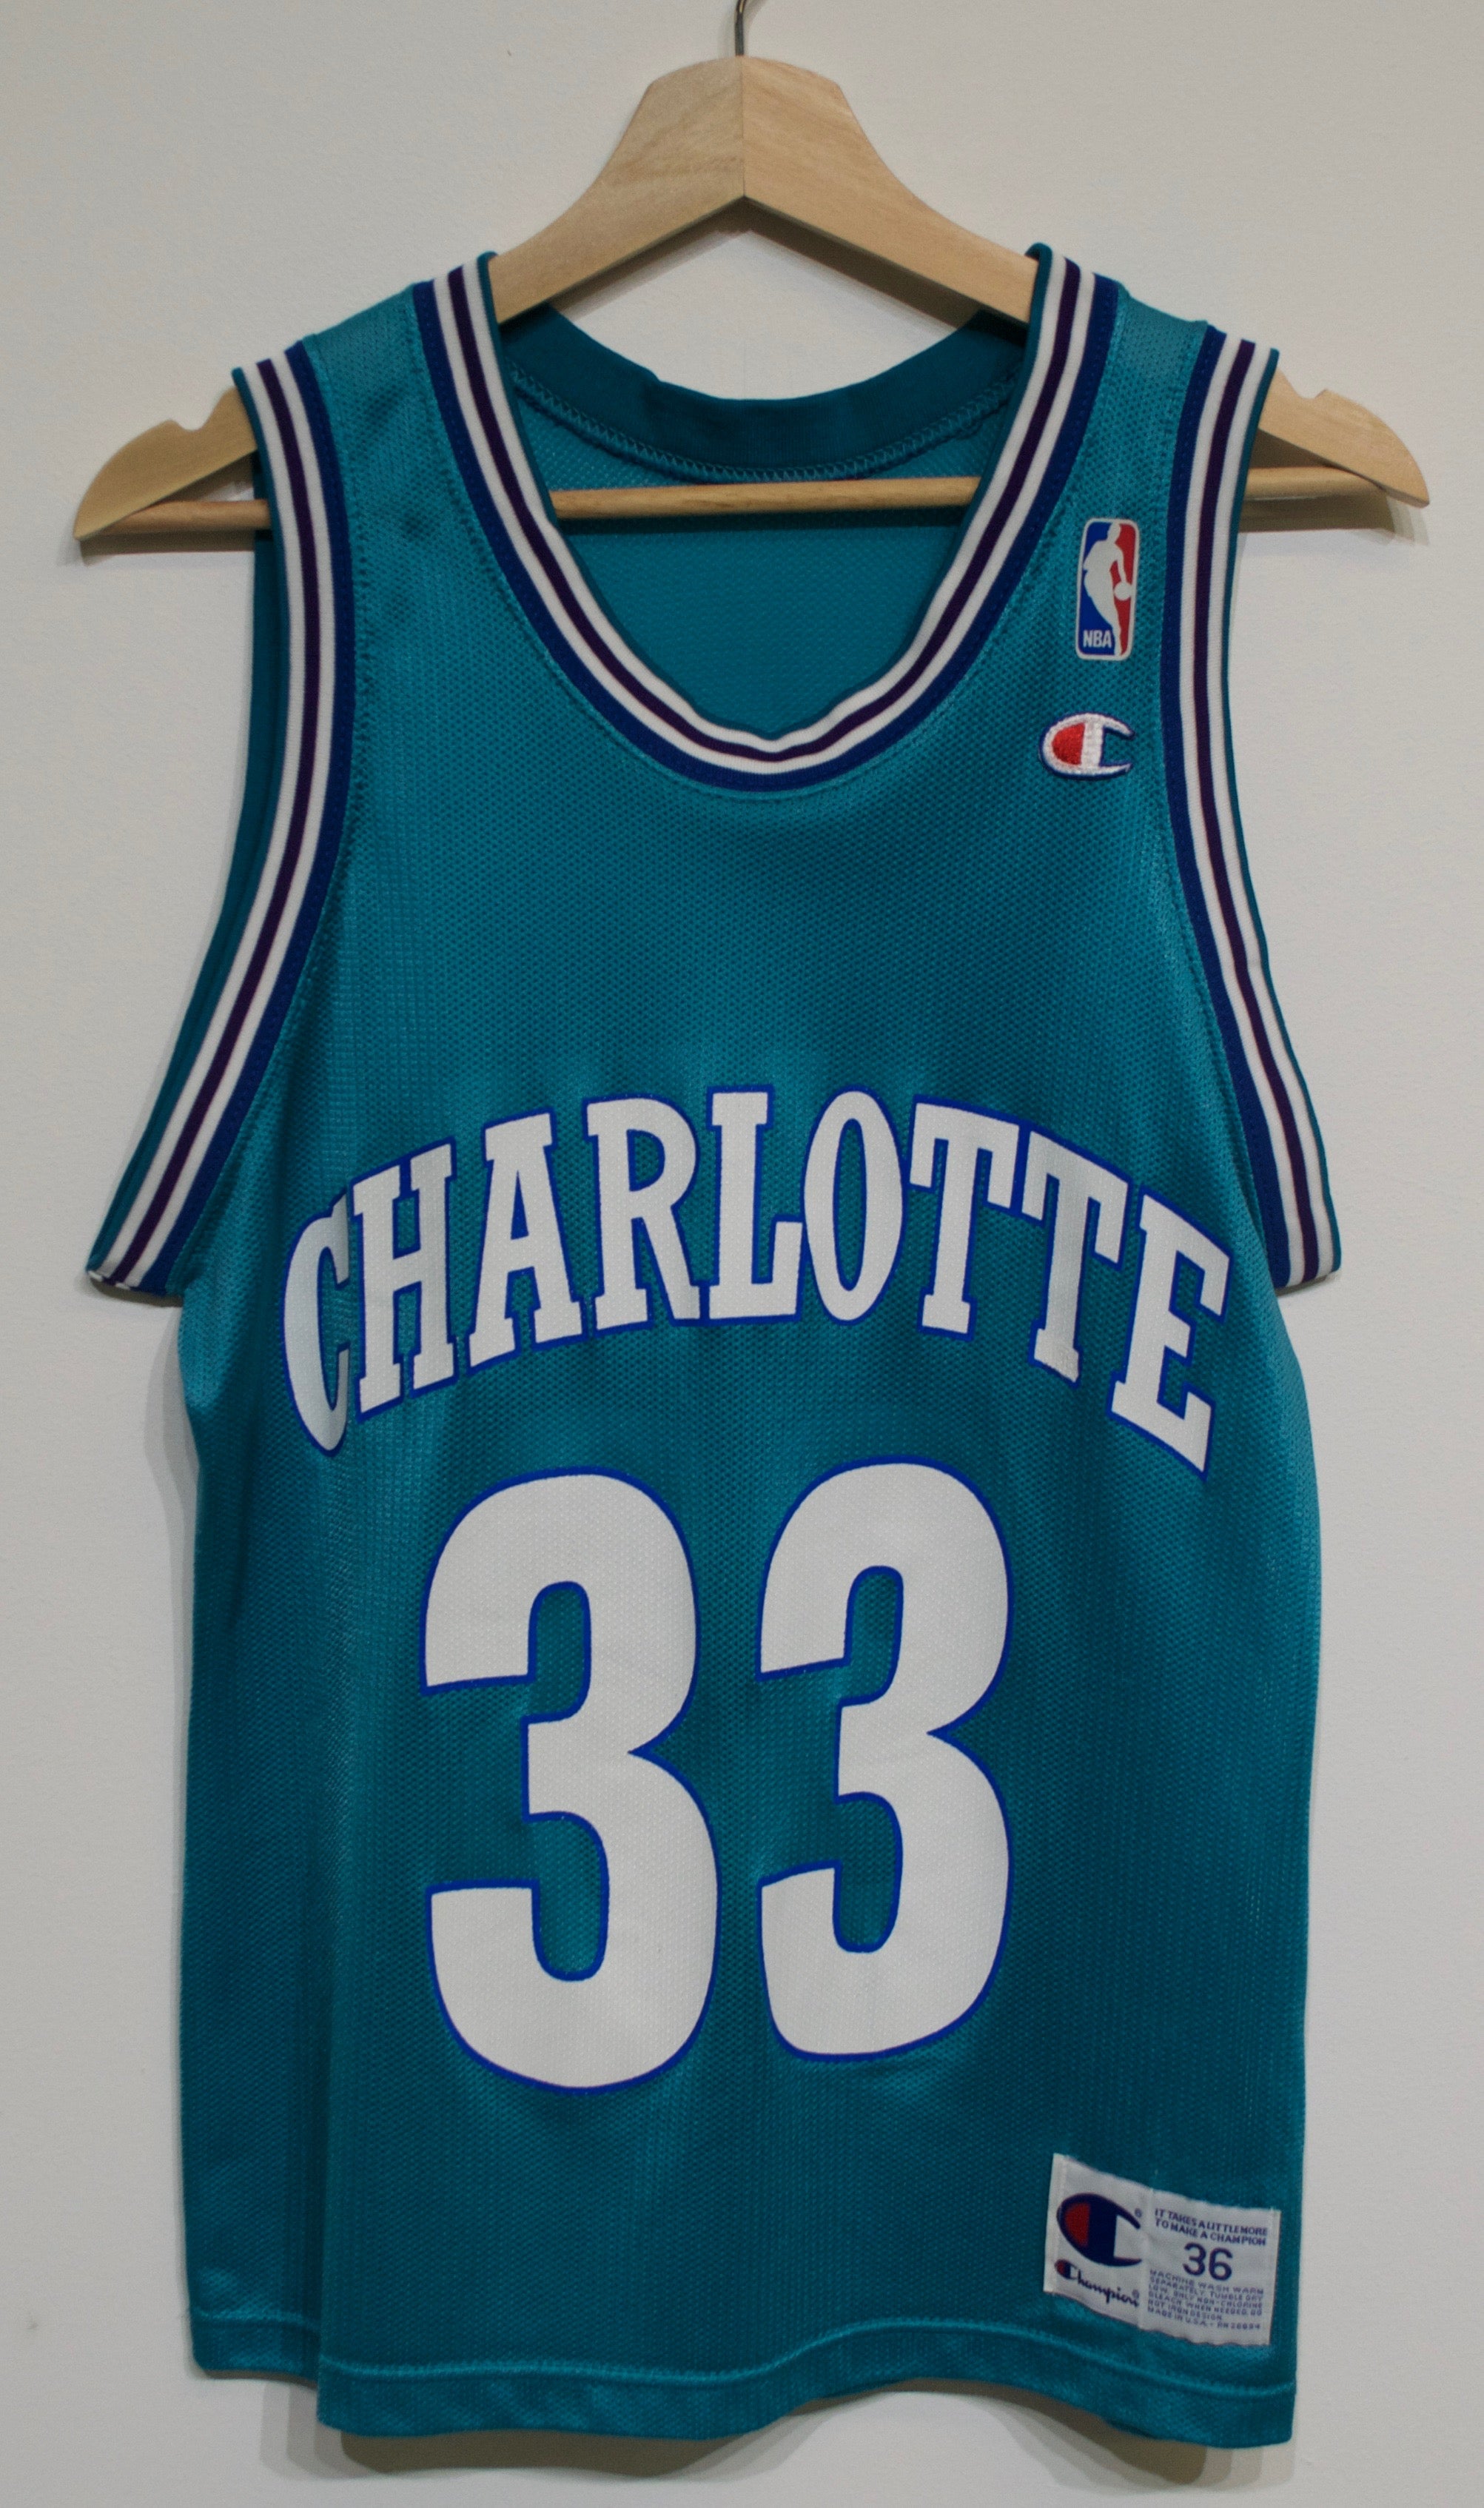 Alonzo Mourning Hornets Jersey sz 36/S – First Team Vintage